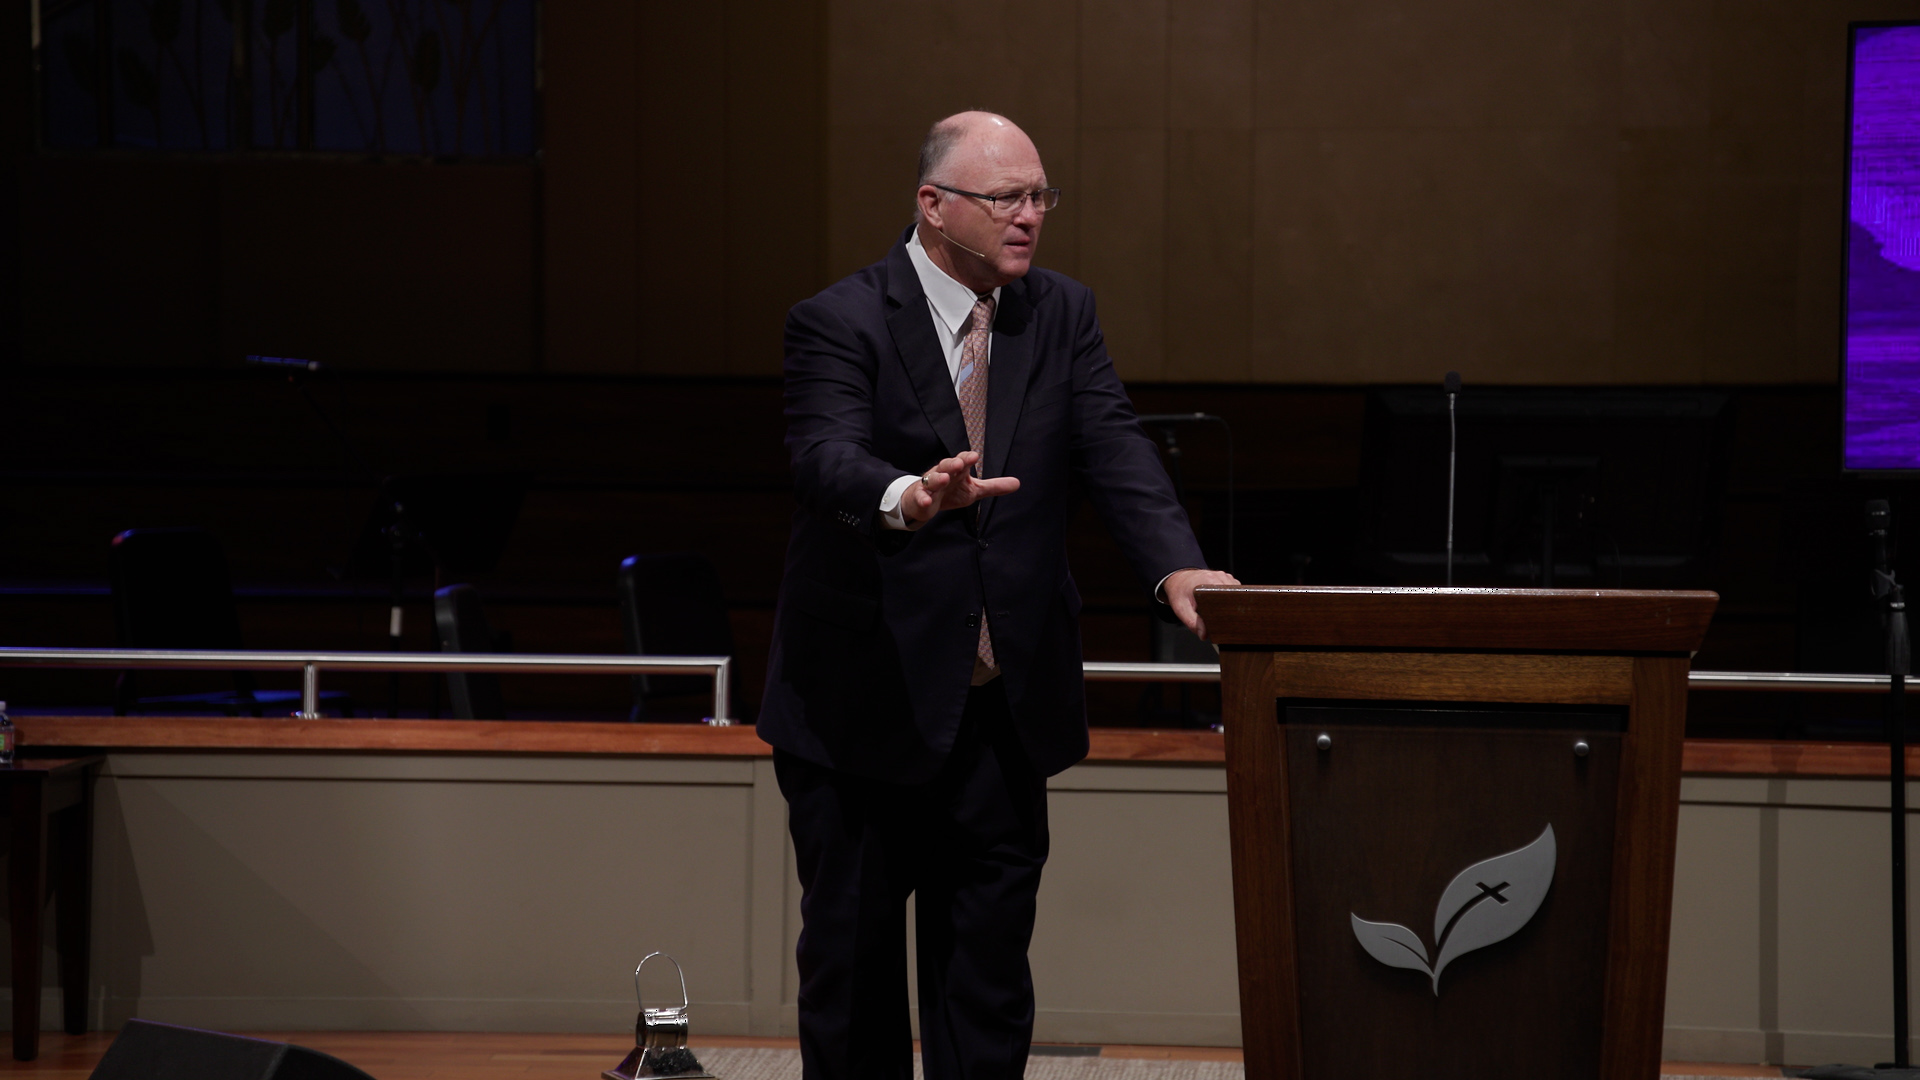 Pastor Paul Chappell: Social Justice or Scriptural Justice Part 2